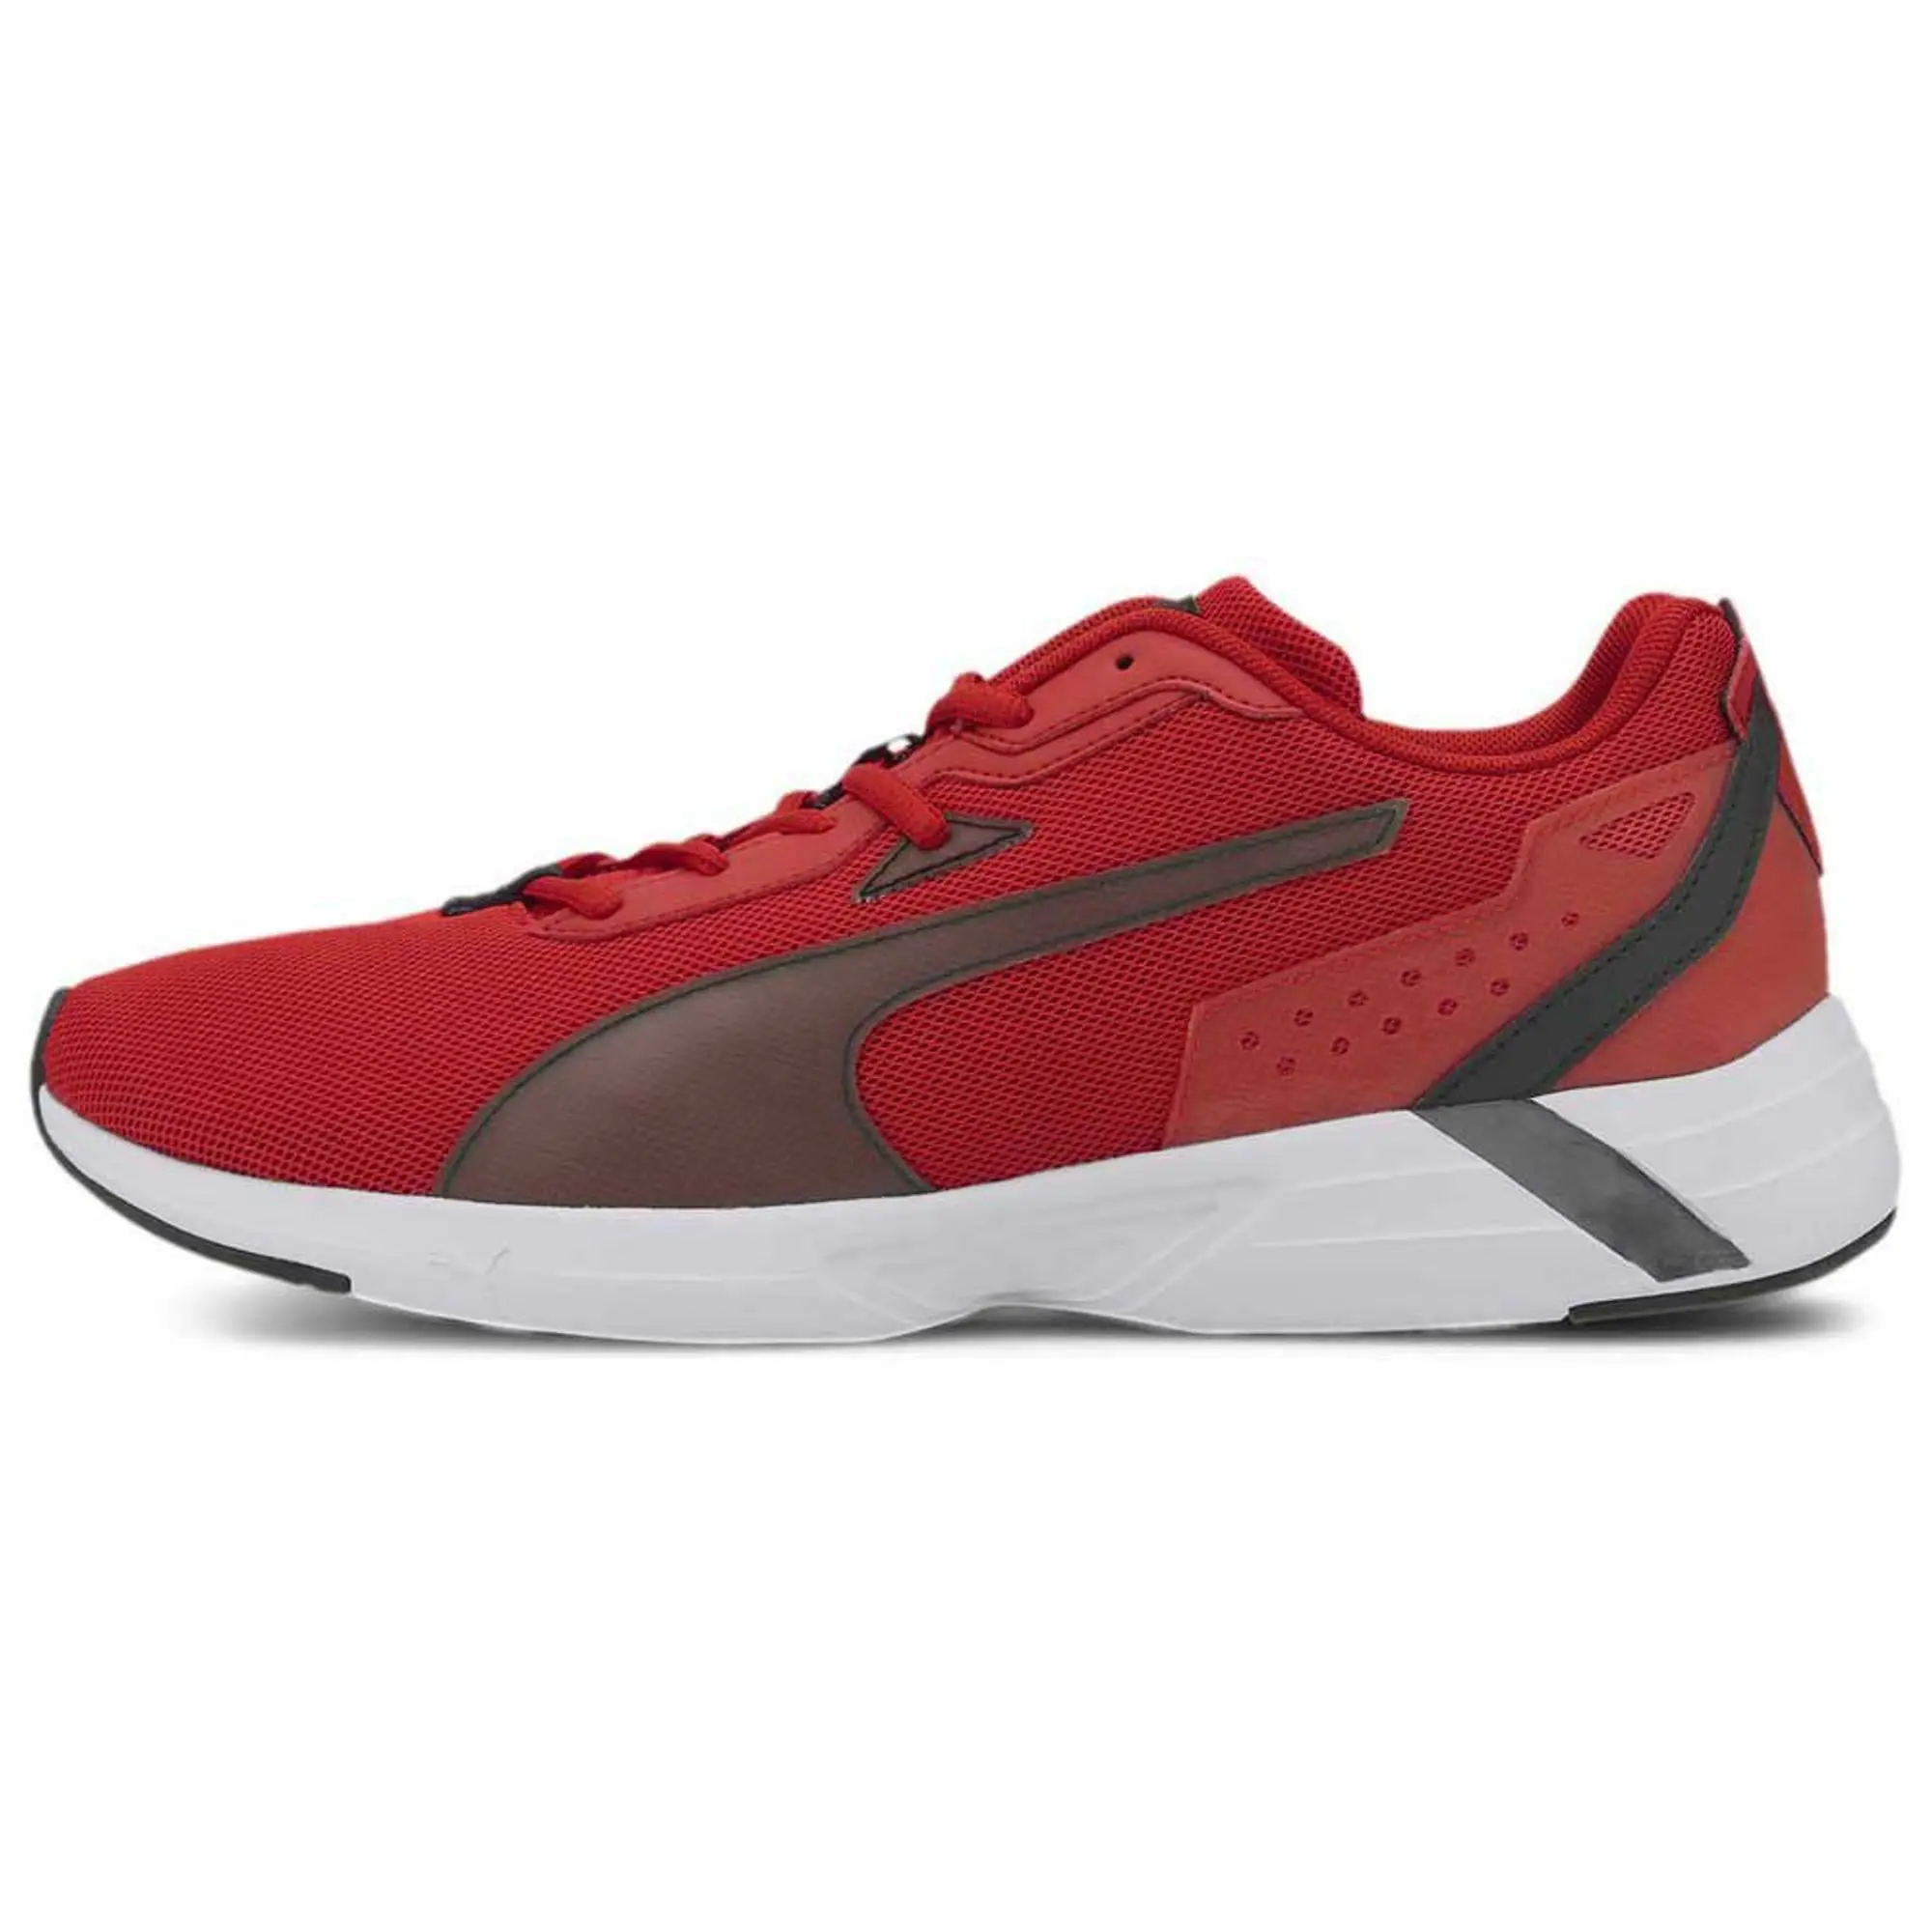 Puma Space Runner Running Shoes  - Red